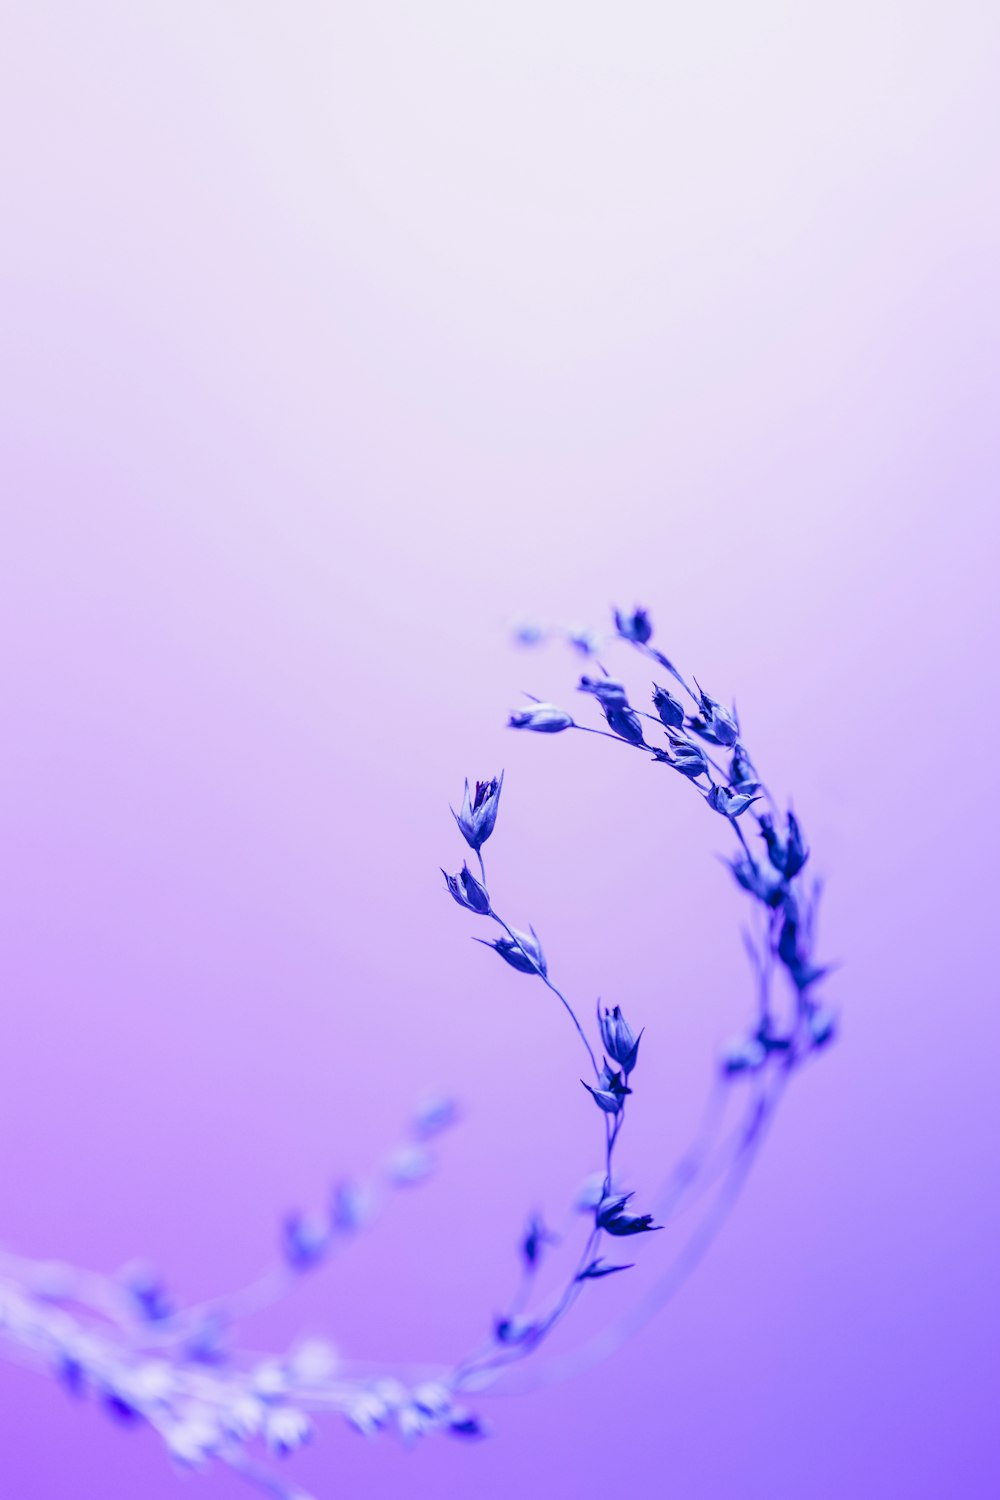 a close up of a plant on a purple and pink background